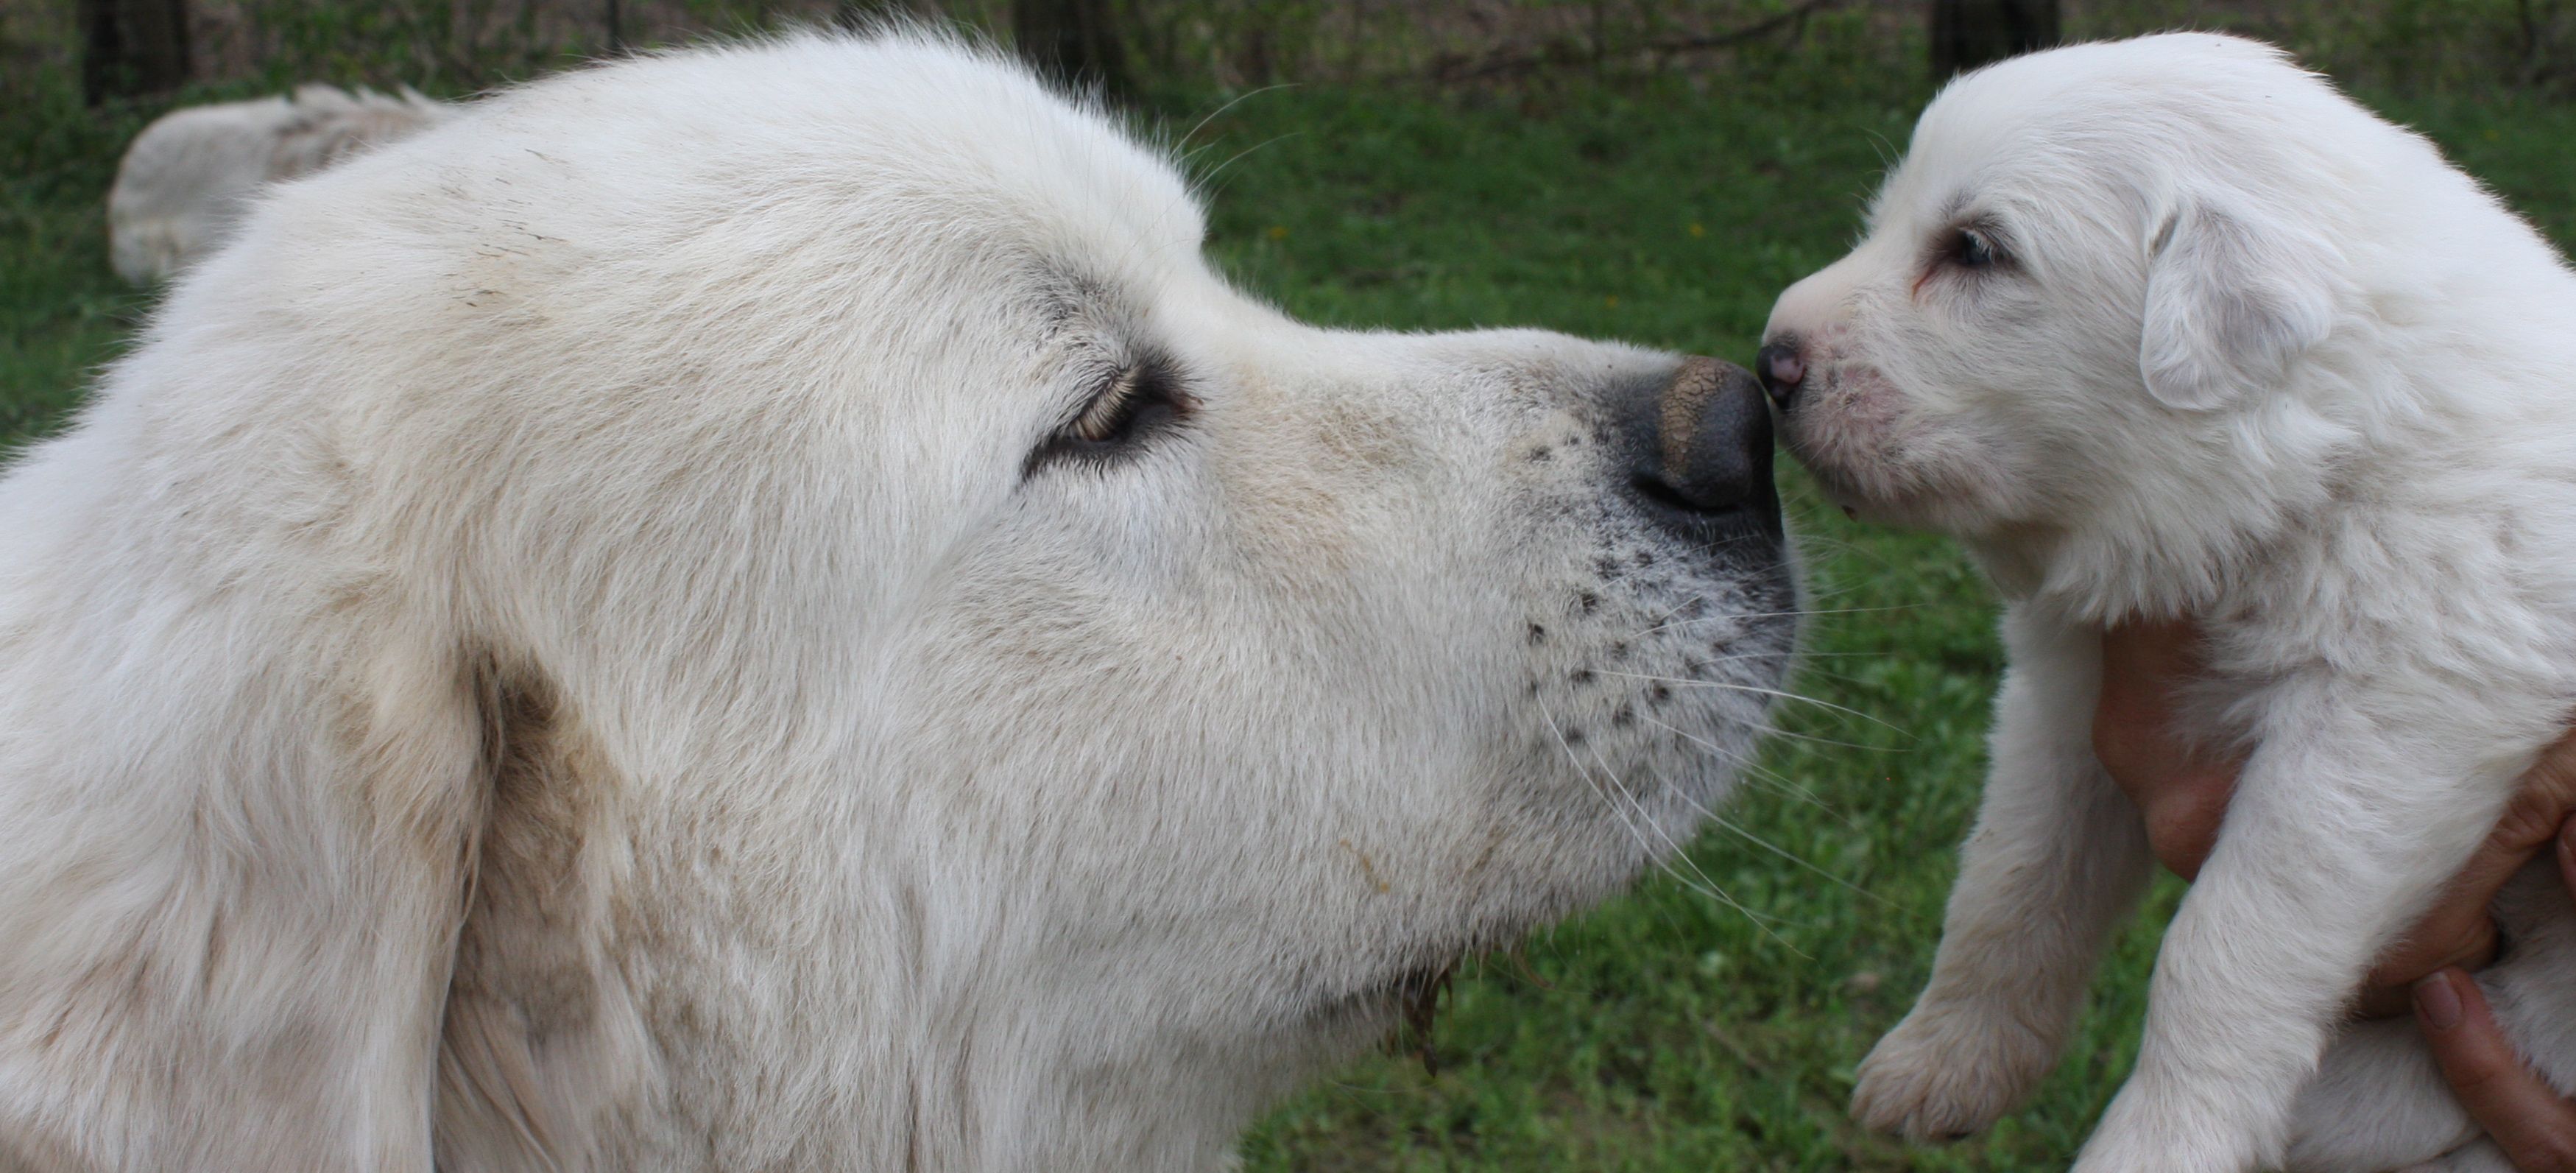 Tender Great Pyrenees dog with her baby photo. Great pyrenees dog, Great pyrenees, Great pyrenees puppy